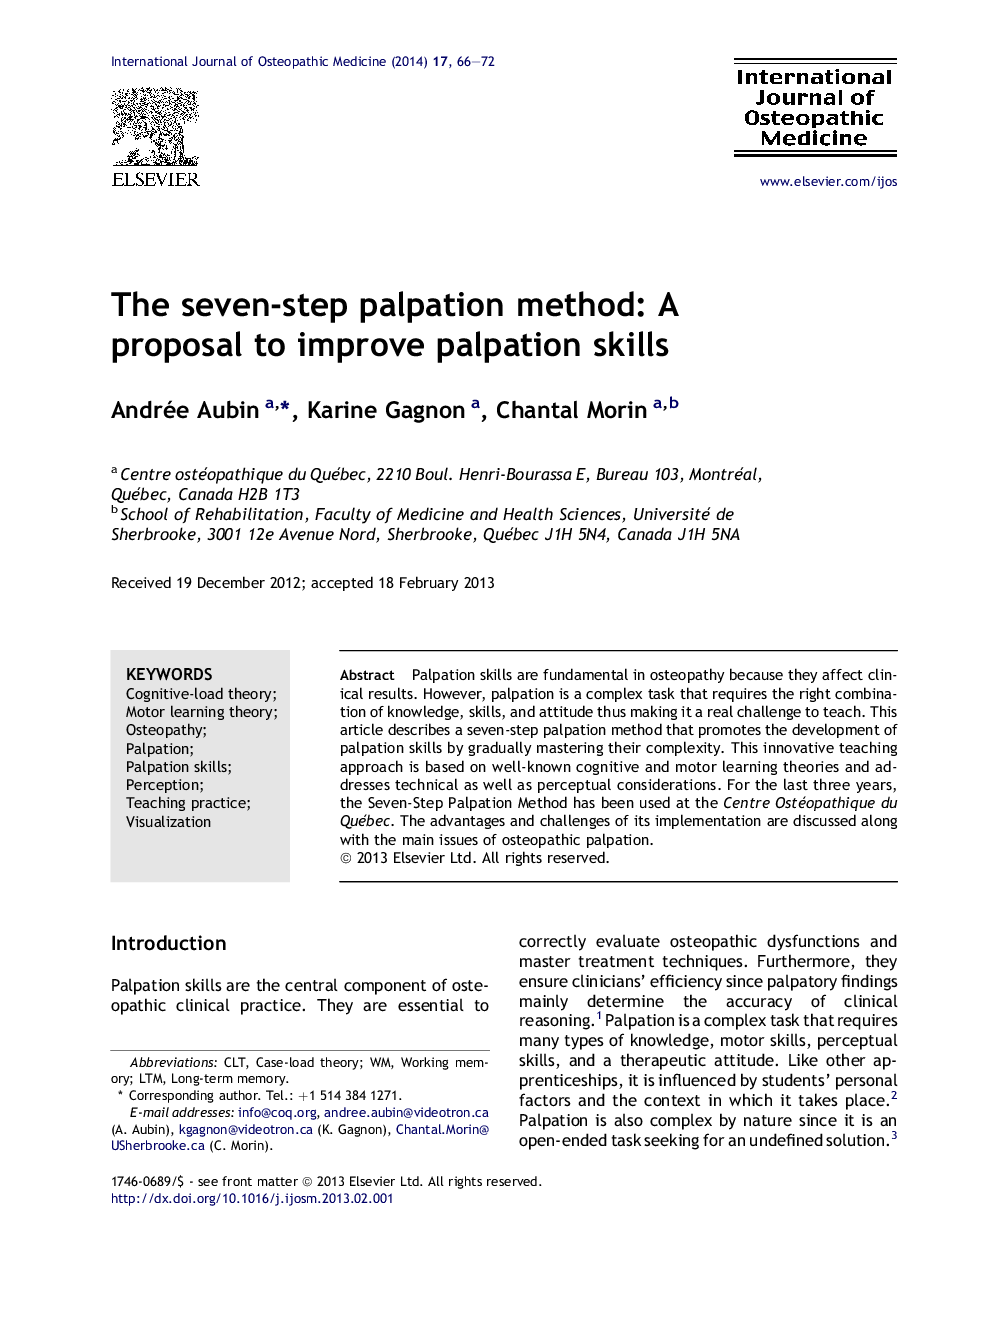 The seven-step palpation method: A proposal to improve palpation skills